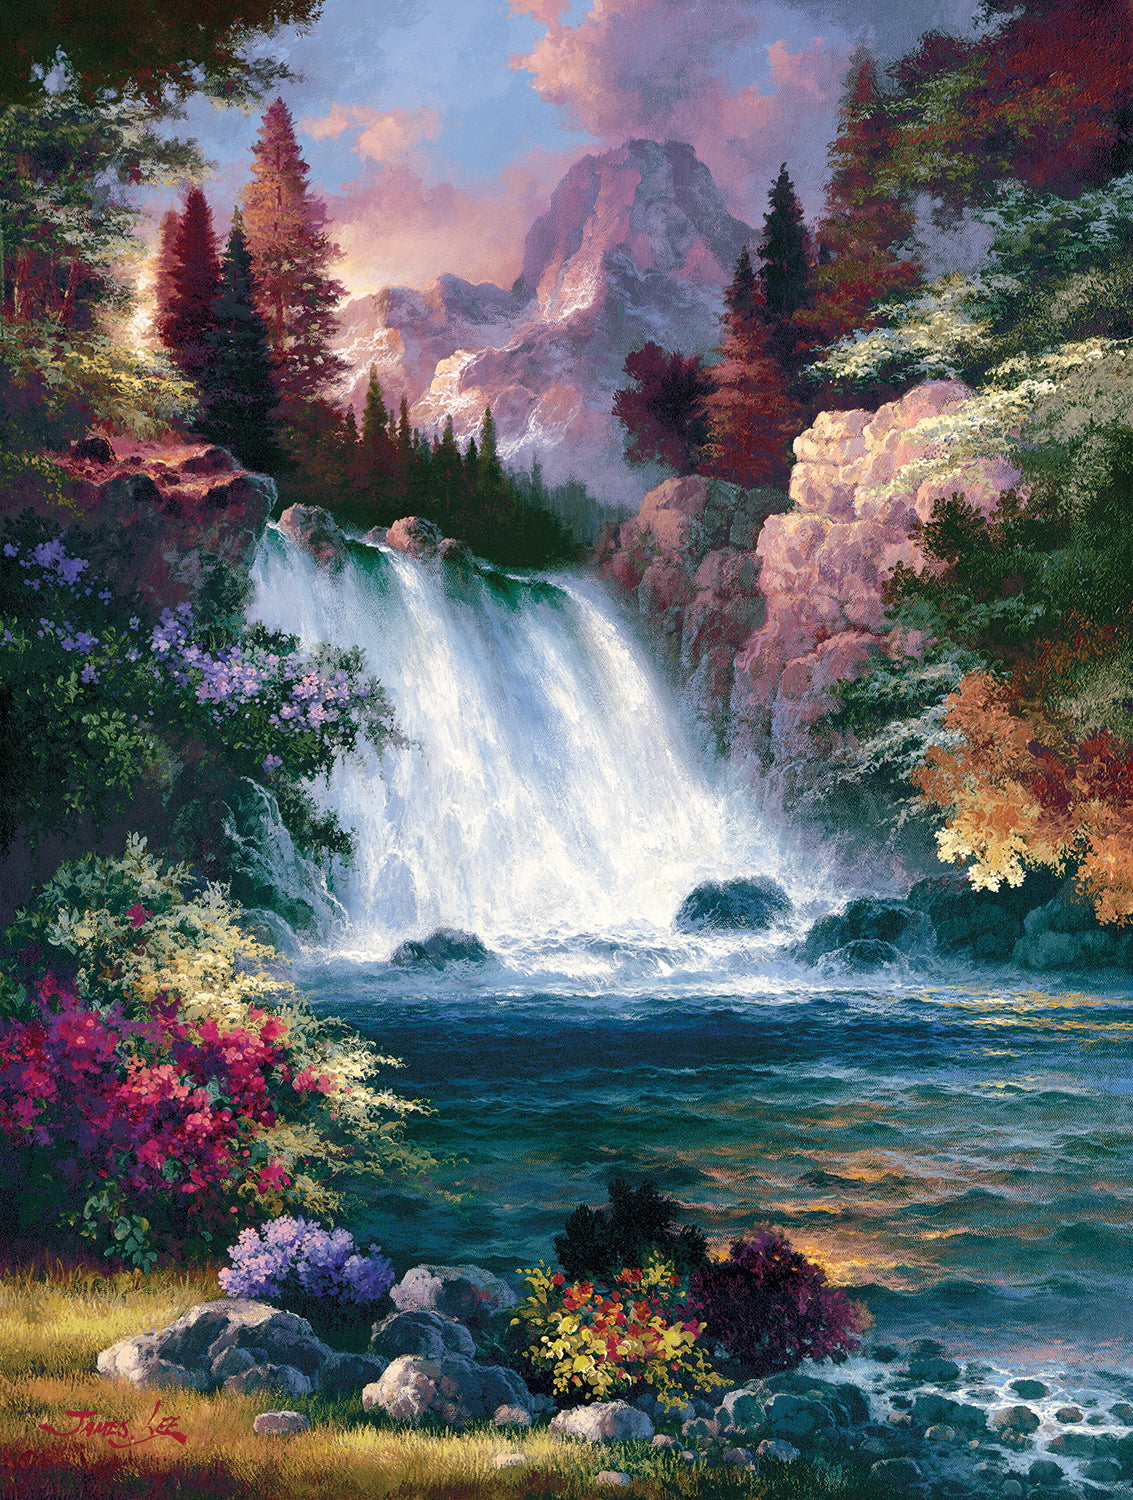 Sunrise Falls Spring by James Lee, 1000 Piece Puzzle